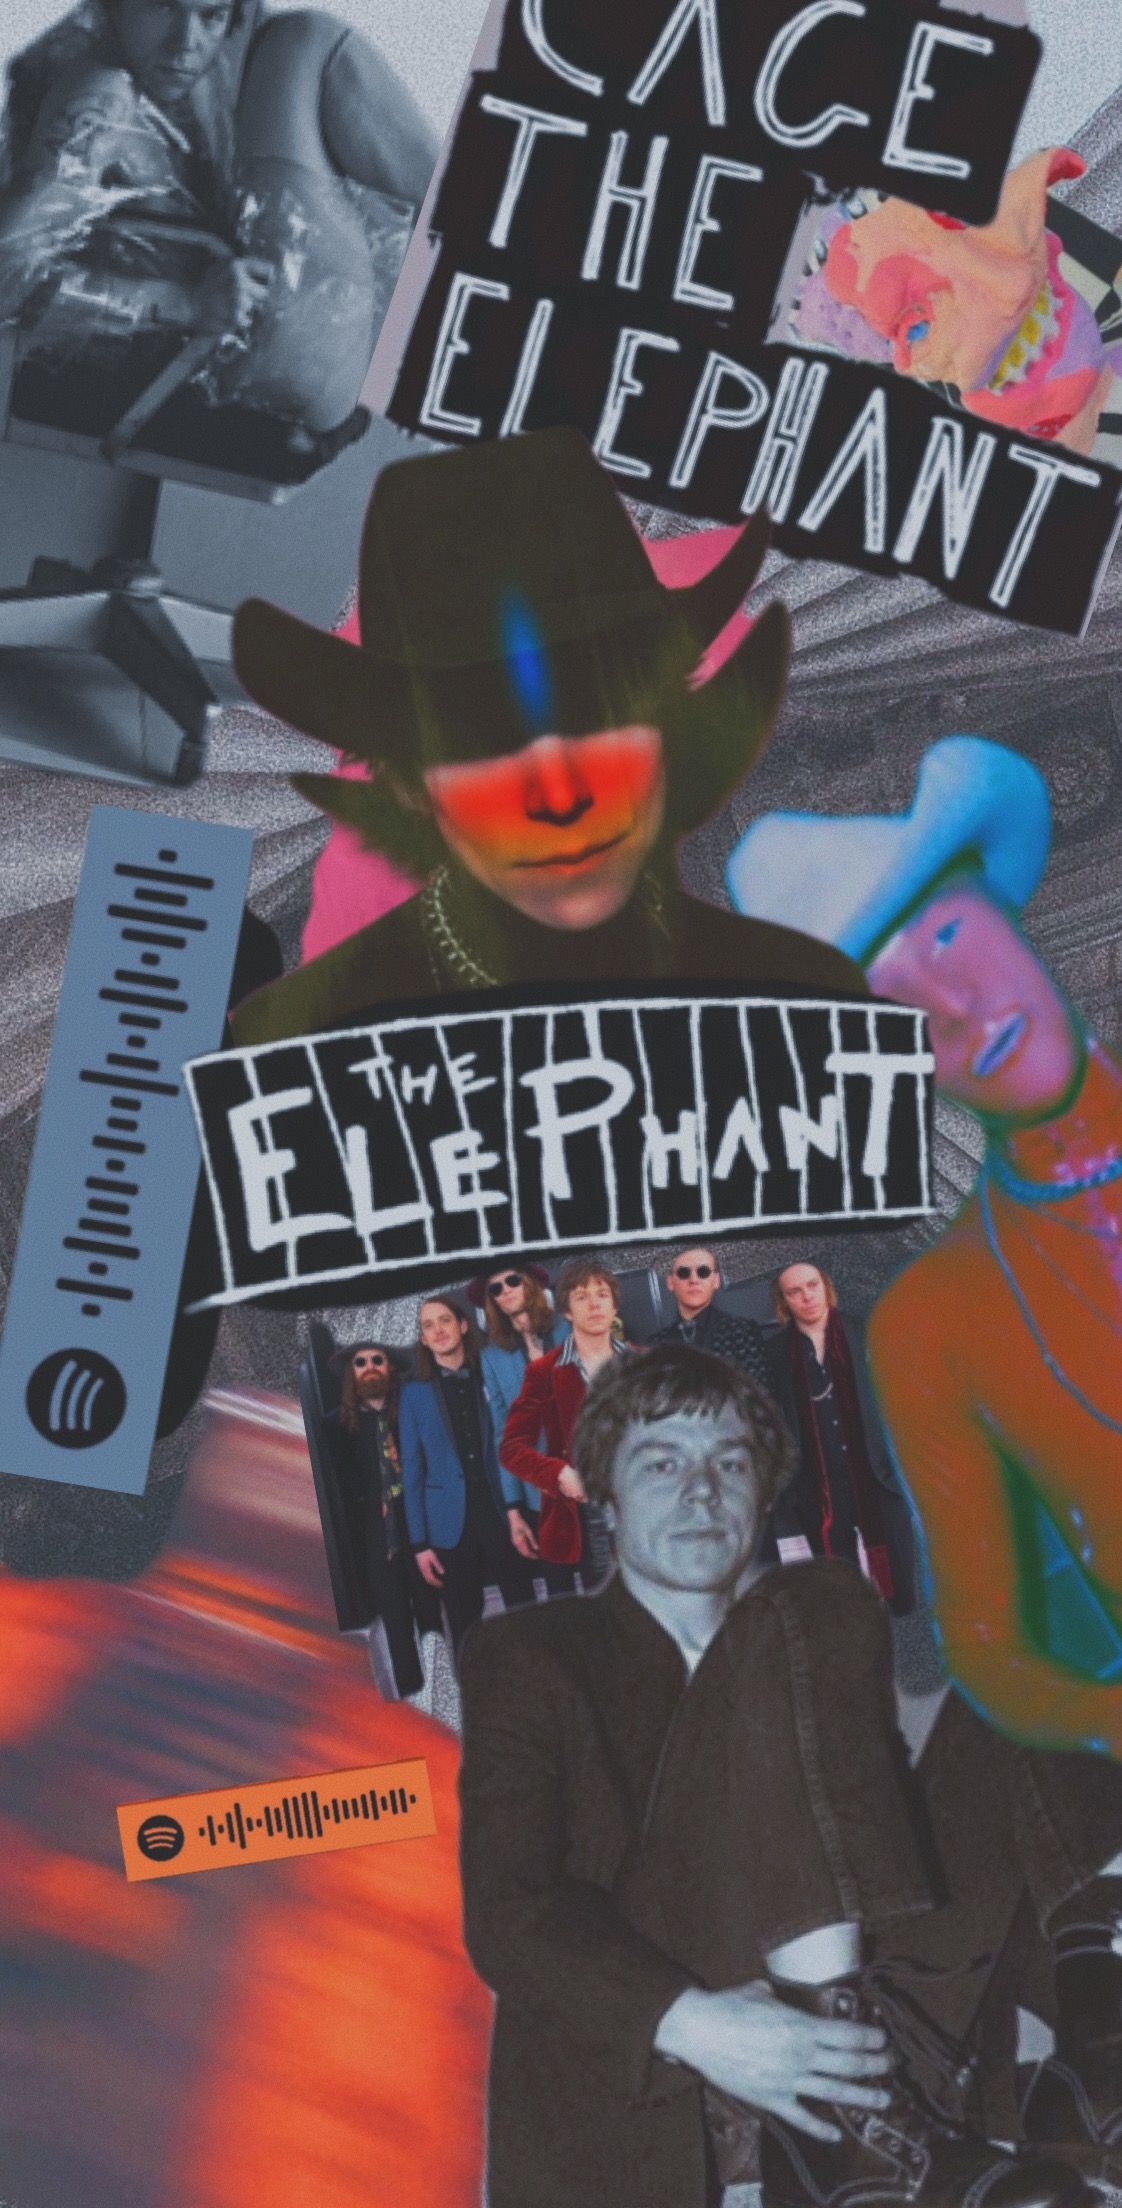 Wallpaper cage the elephant cage the elephant grunge posters band posters